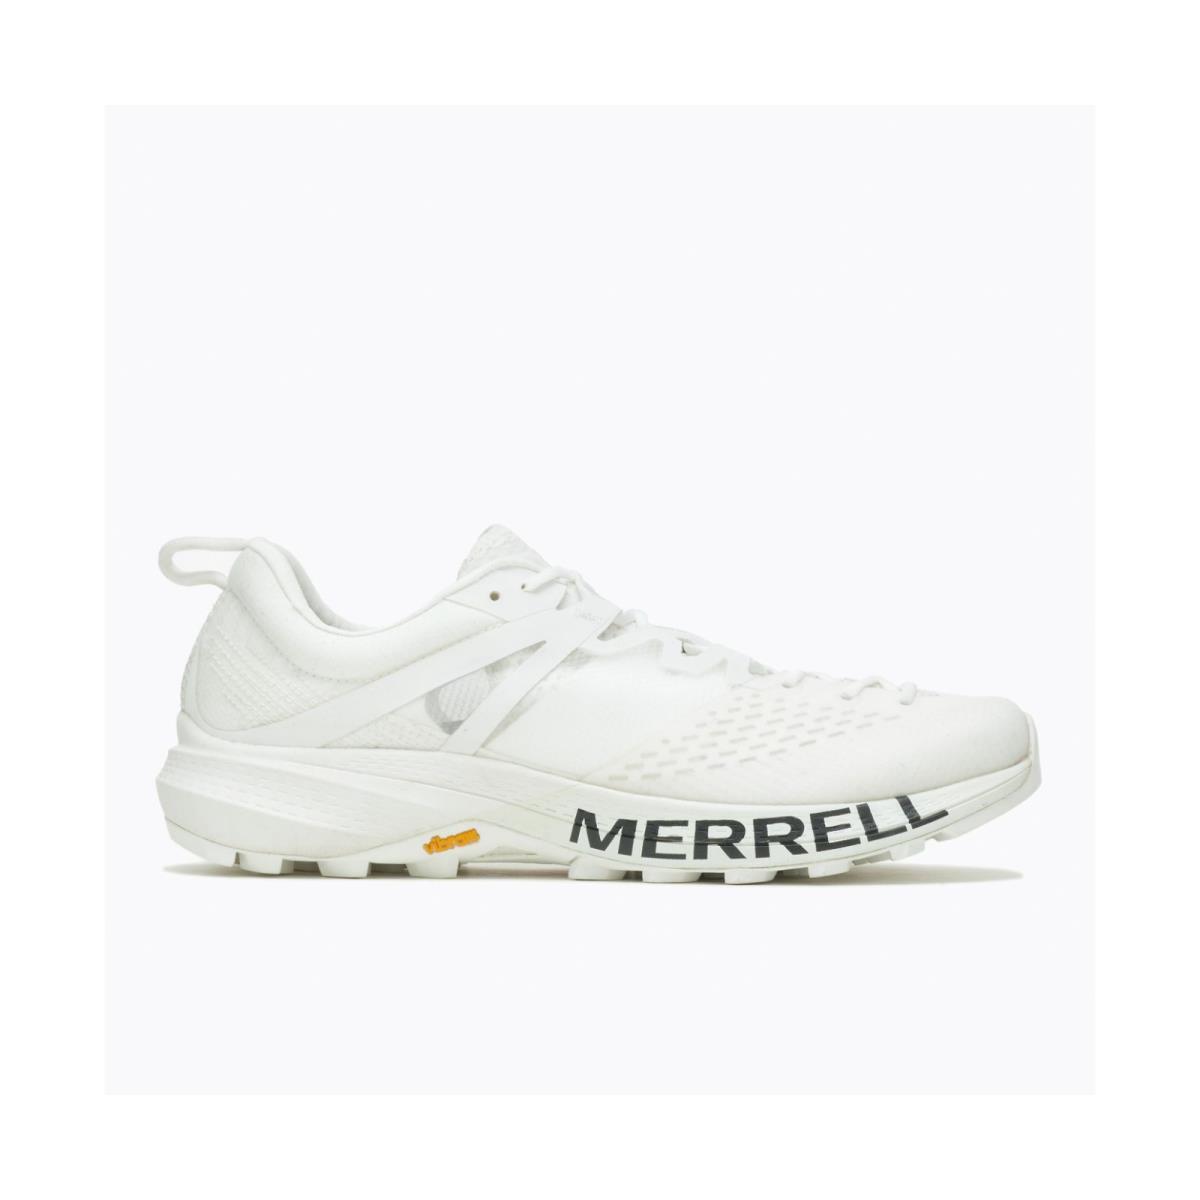 Merrell Lightweight Breathable Comfort Men`s Shoes Rubber Outsole Limited Editn White